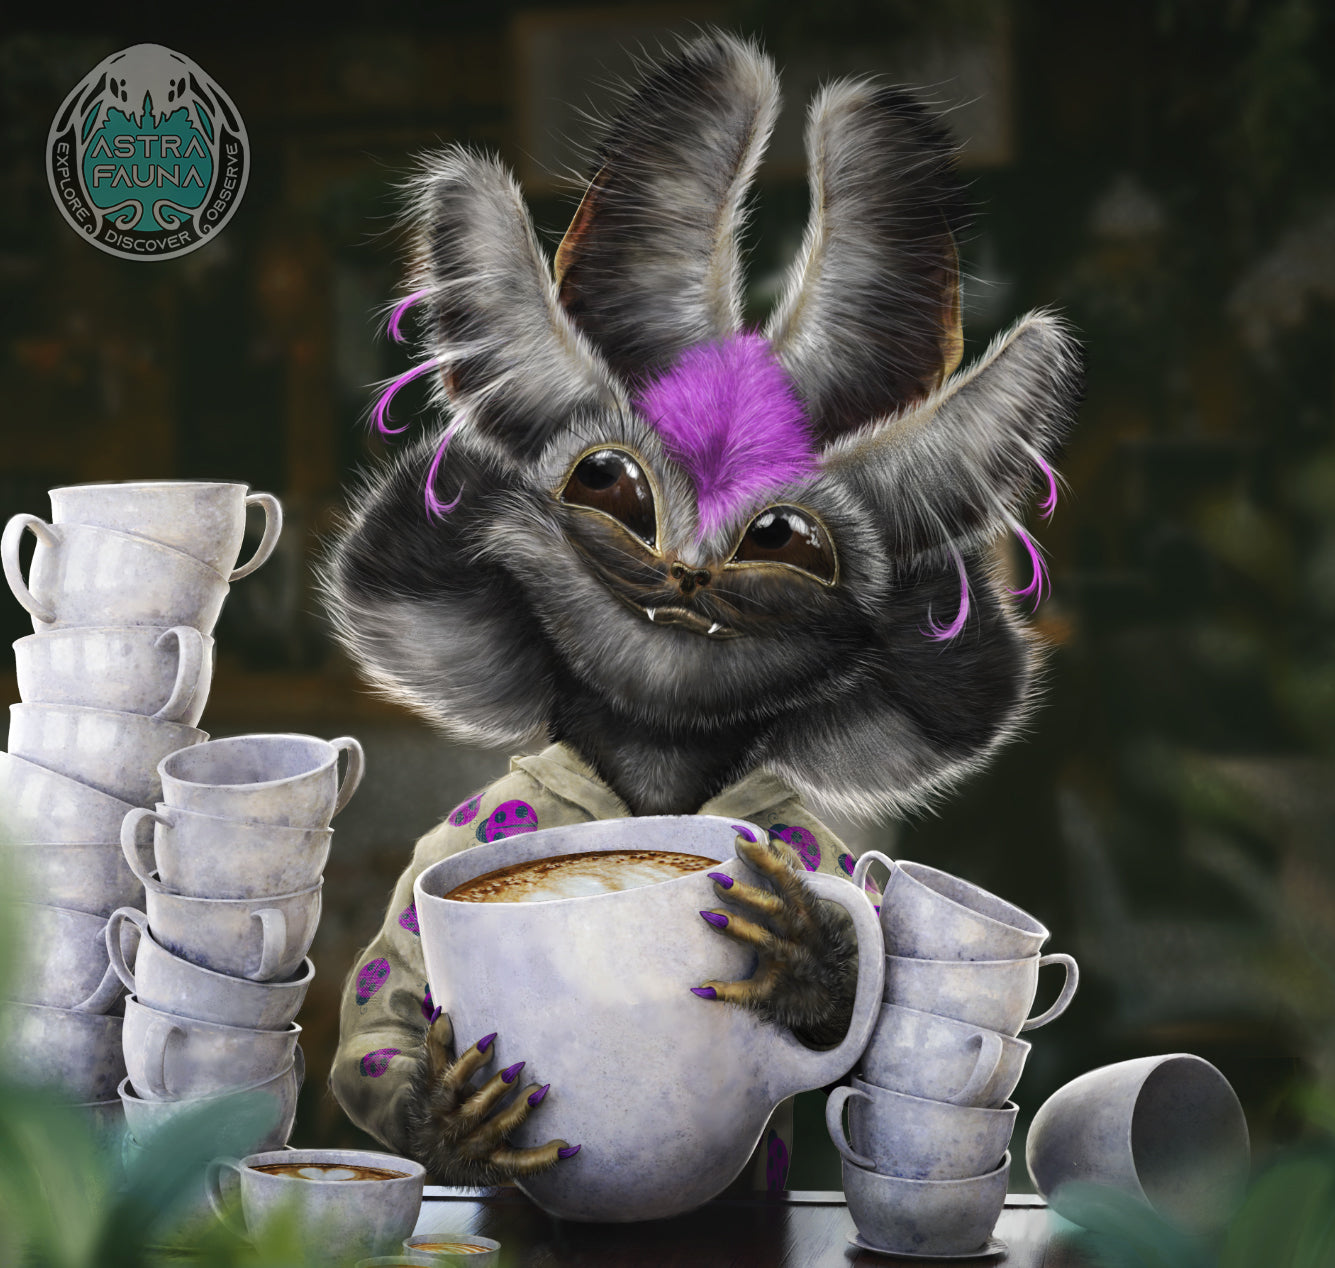 Close up of her furry face. Taqriel - a bushbaby/cat like alien creature from Astra Fauna with a cup of coffee, enjoying a warm beverage to start the day.